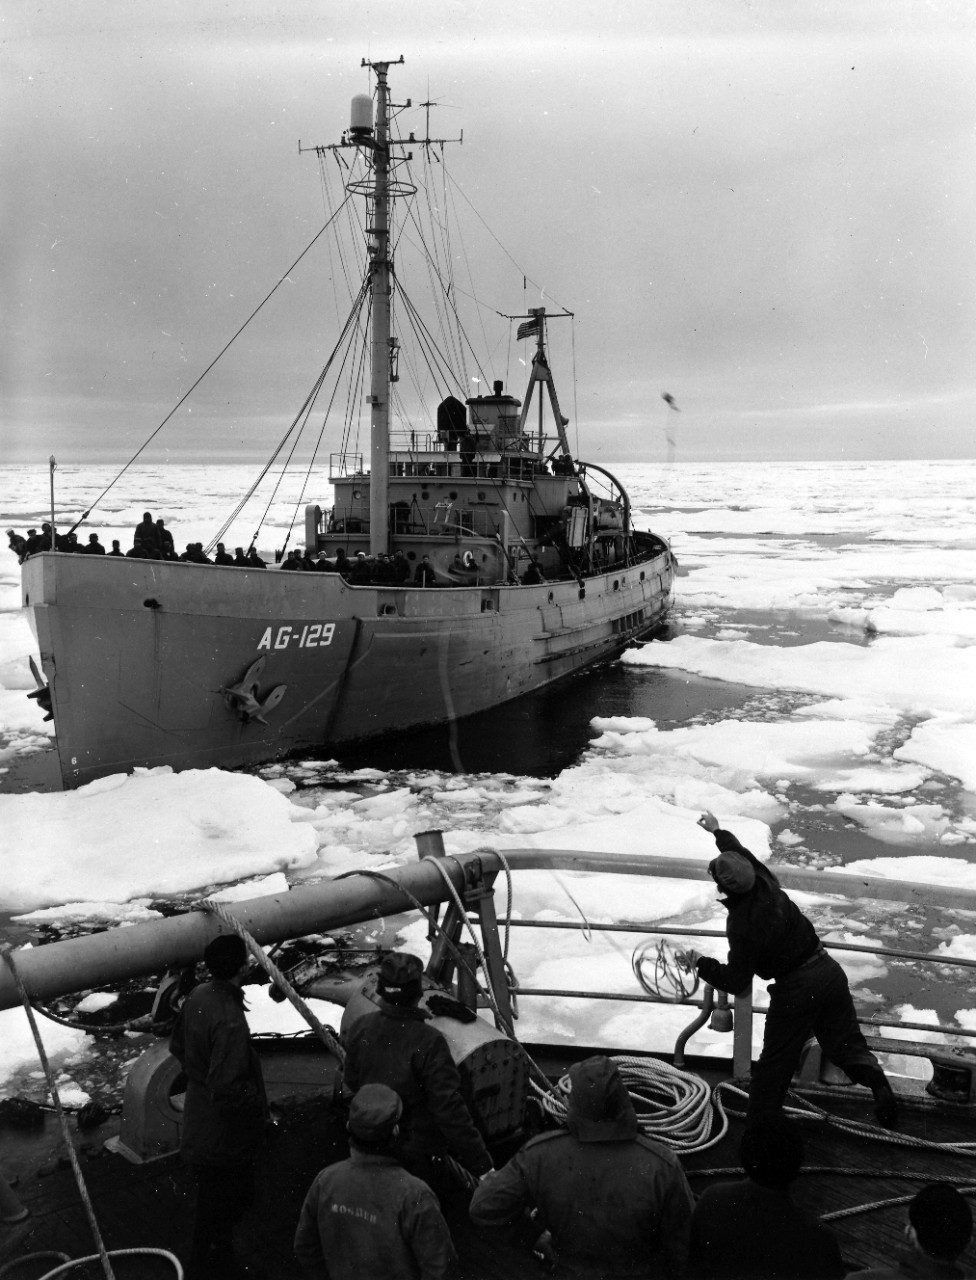 QUA.2013-16.01.01 USS Whitewood (AG-129) in Arctic waters. 